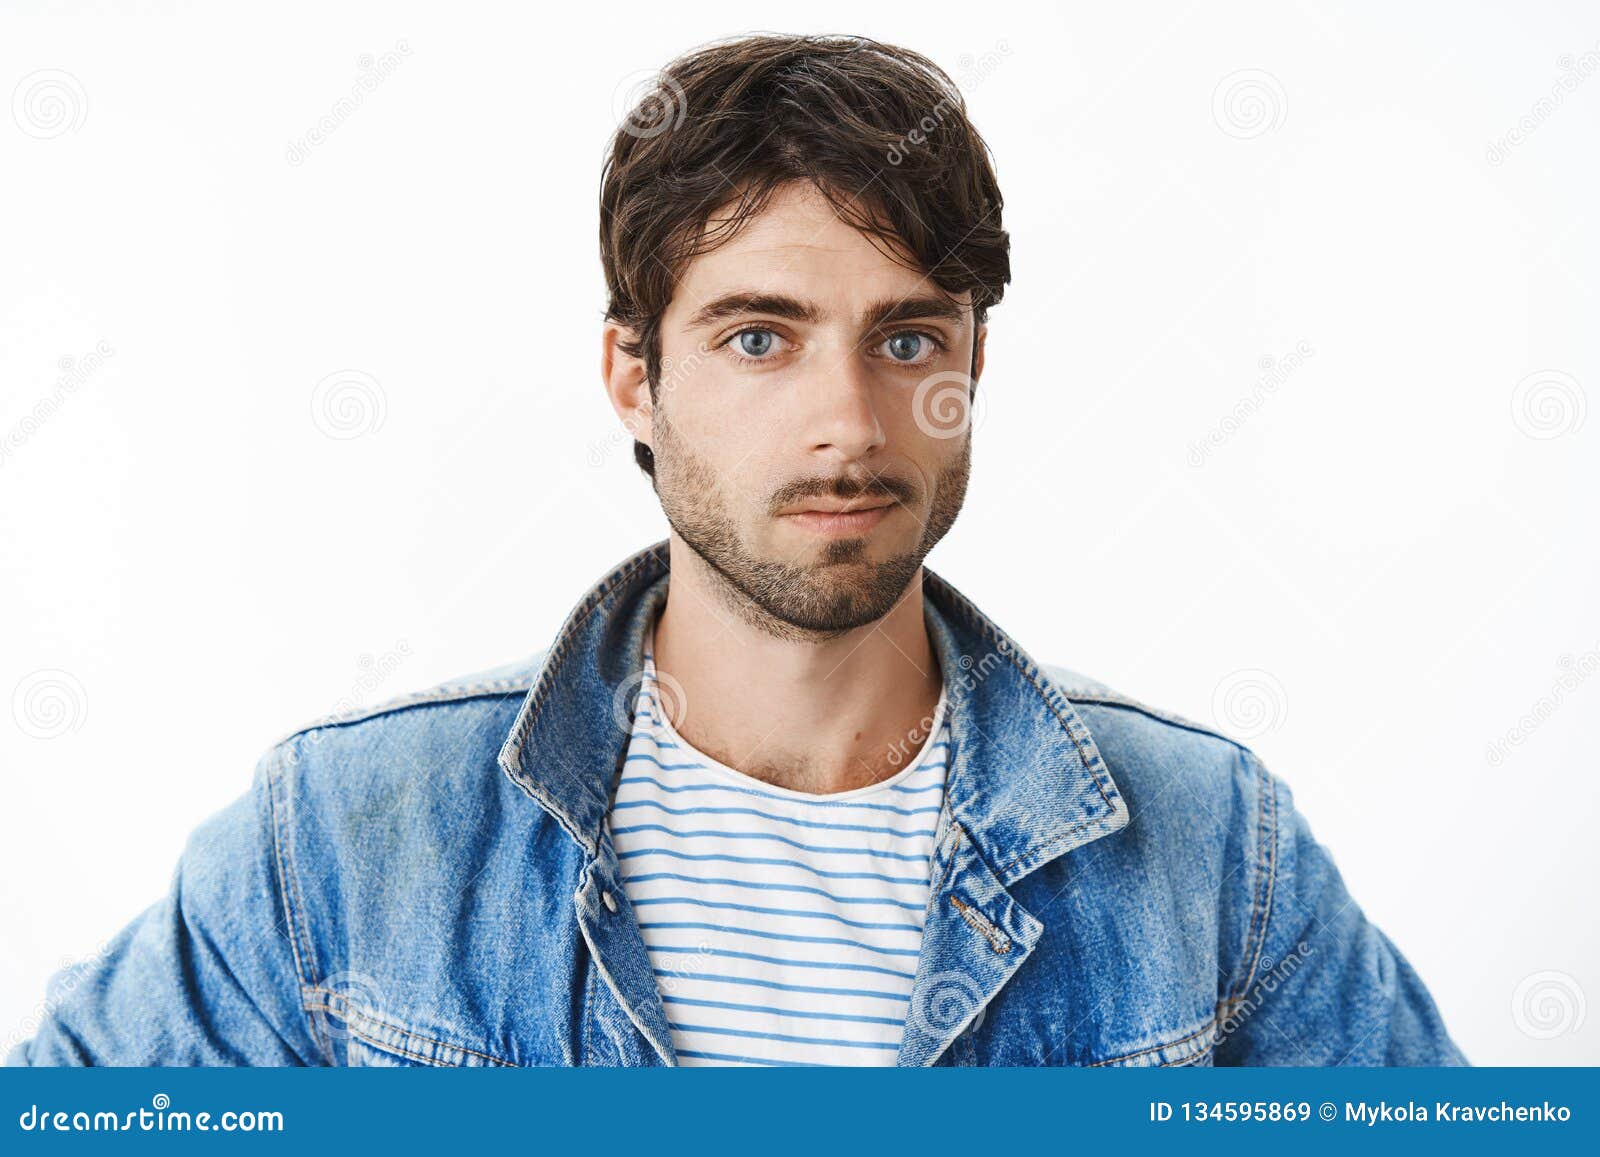 Blue-eyed man with dark hair and beard - wide 6